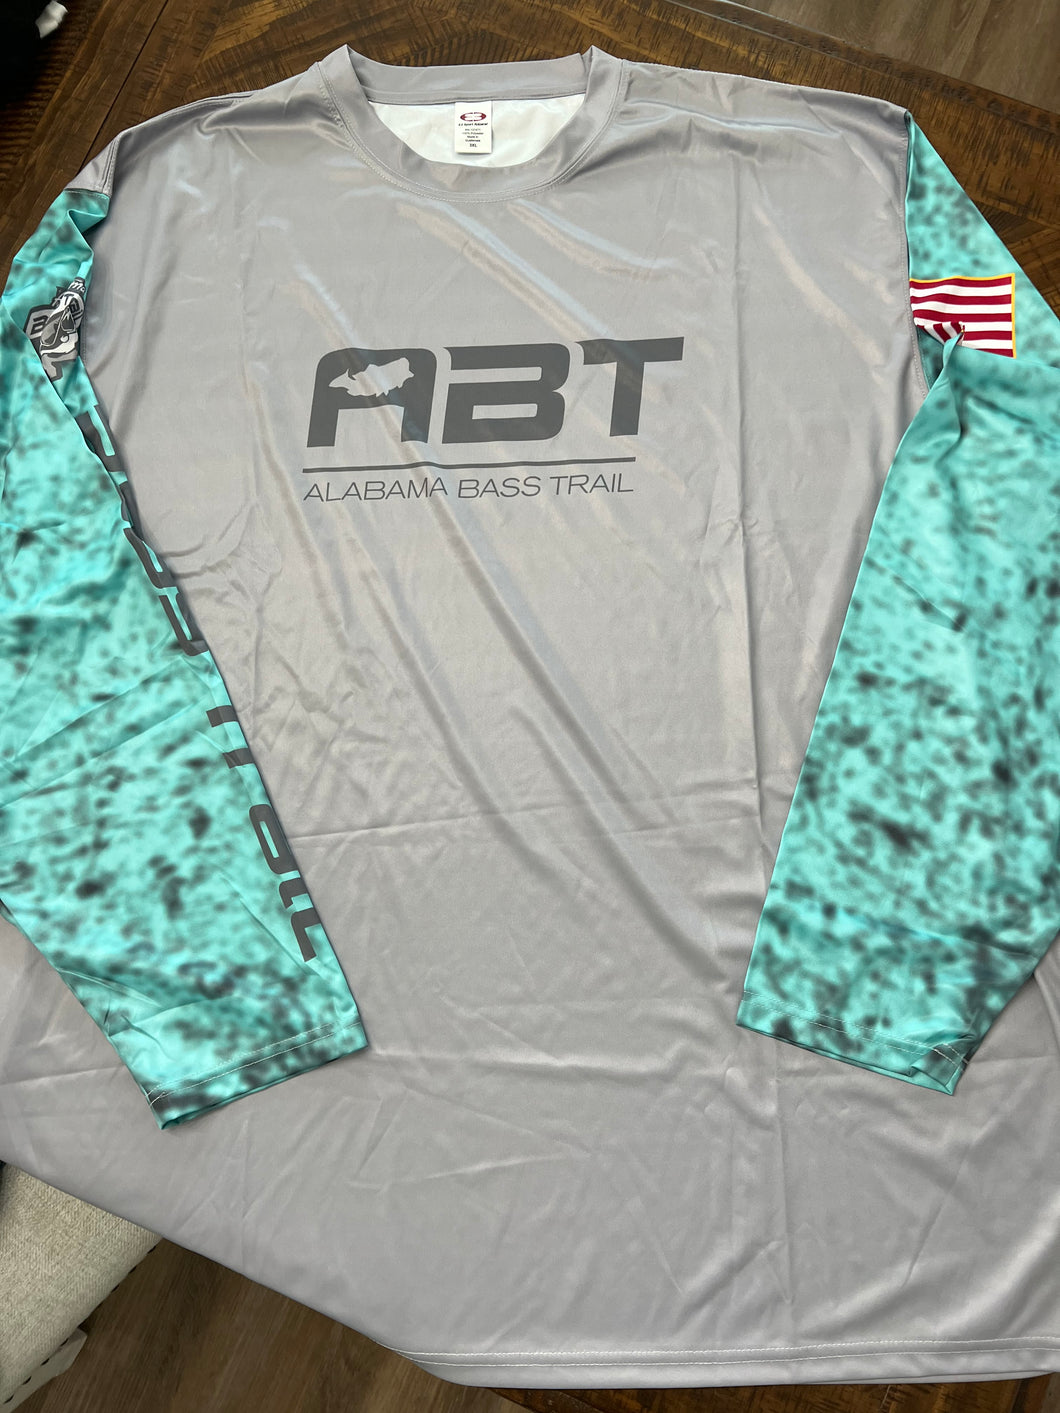 Grey Team Jersey with green sleeve